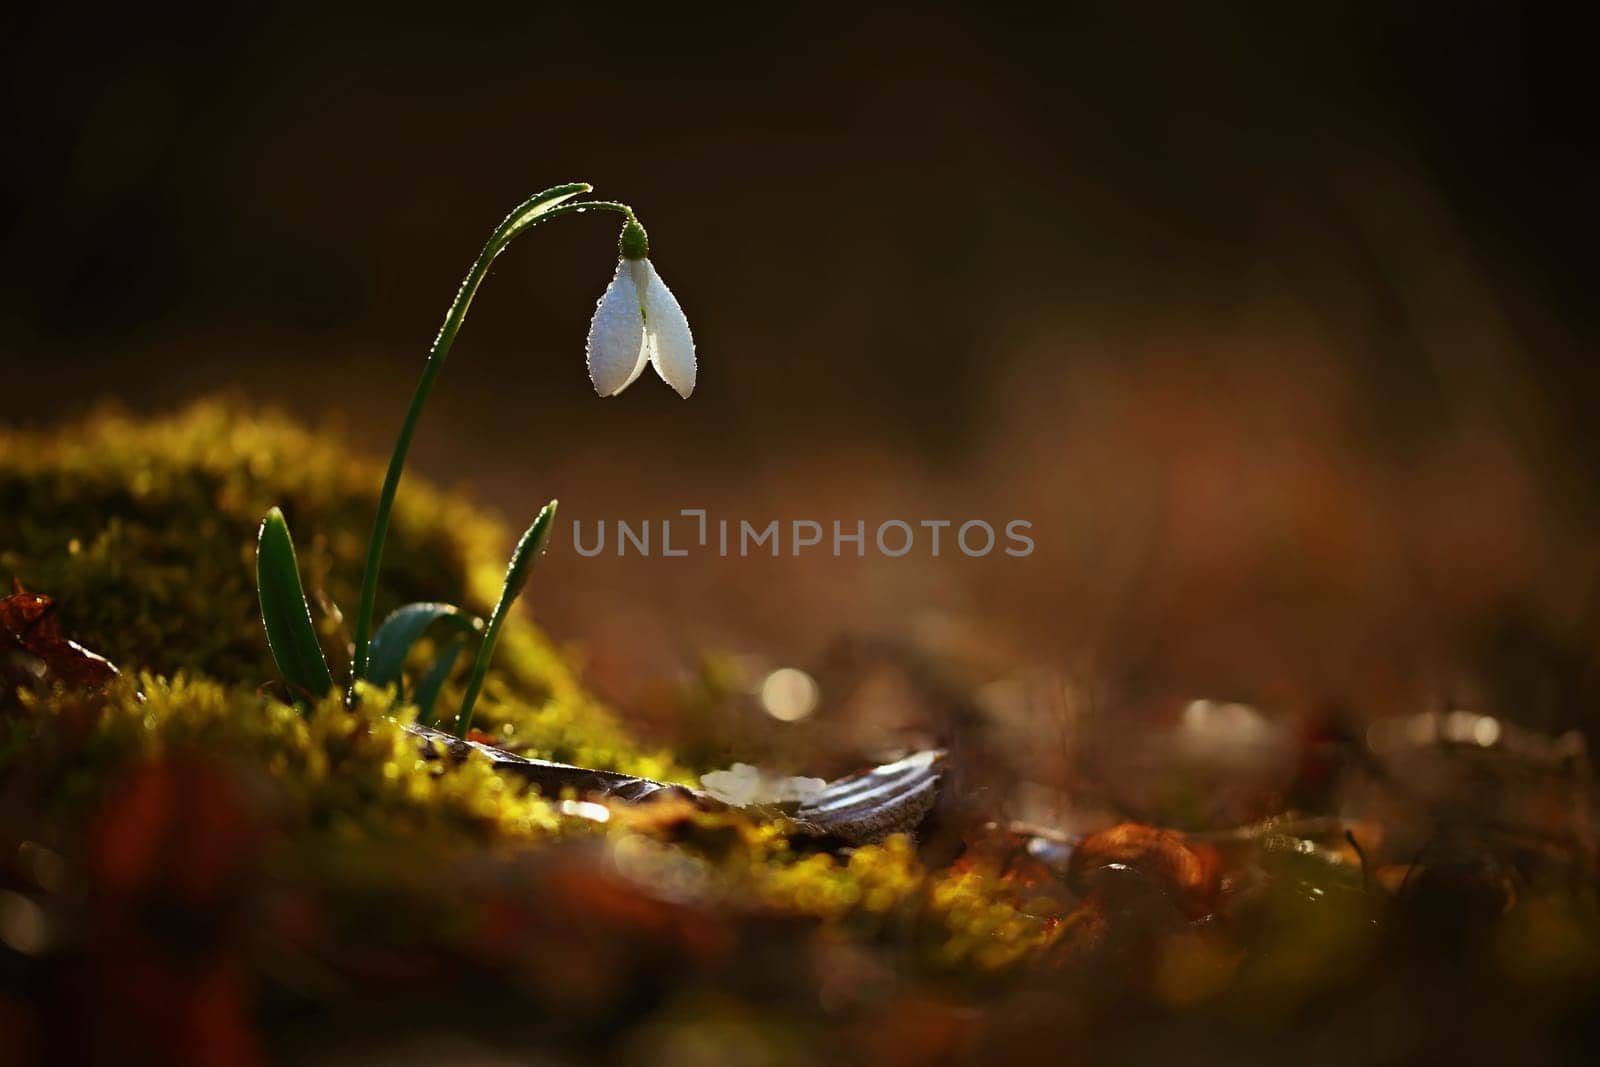 Snowdrops spring flowers. Beautifully blooming in the grass at sunset. Delicate Snowdrop flower is one of the spring symbols. (Amaryllidaceae - Galanthus nivalis)